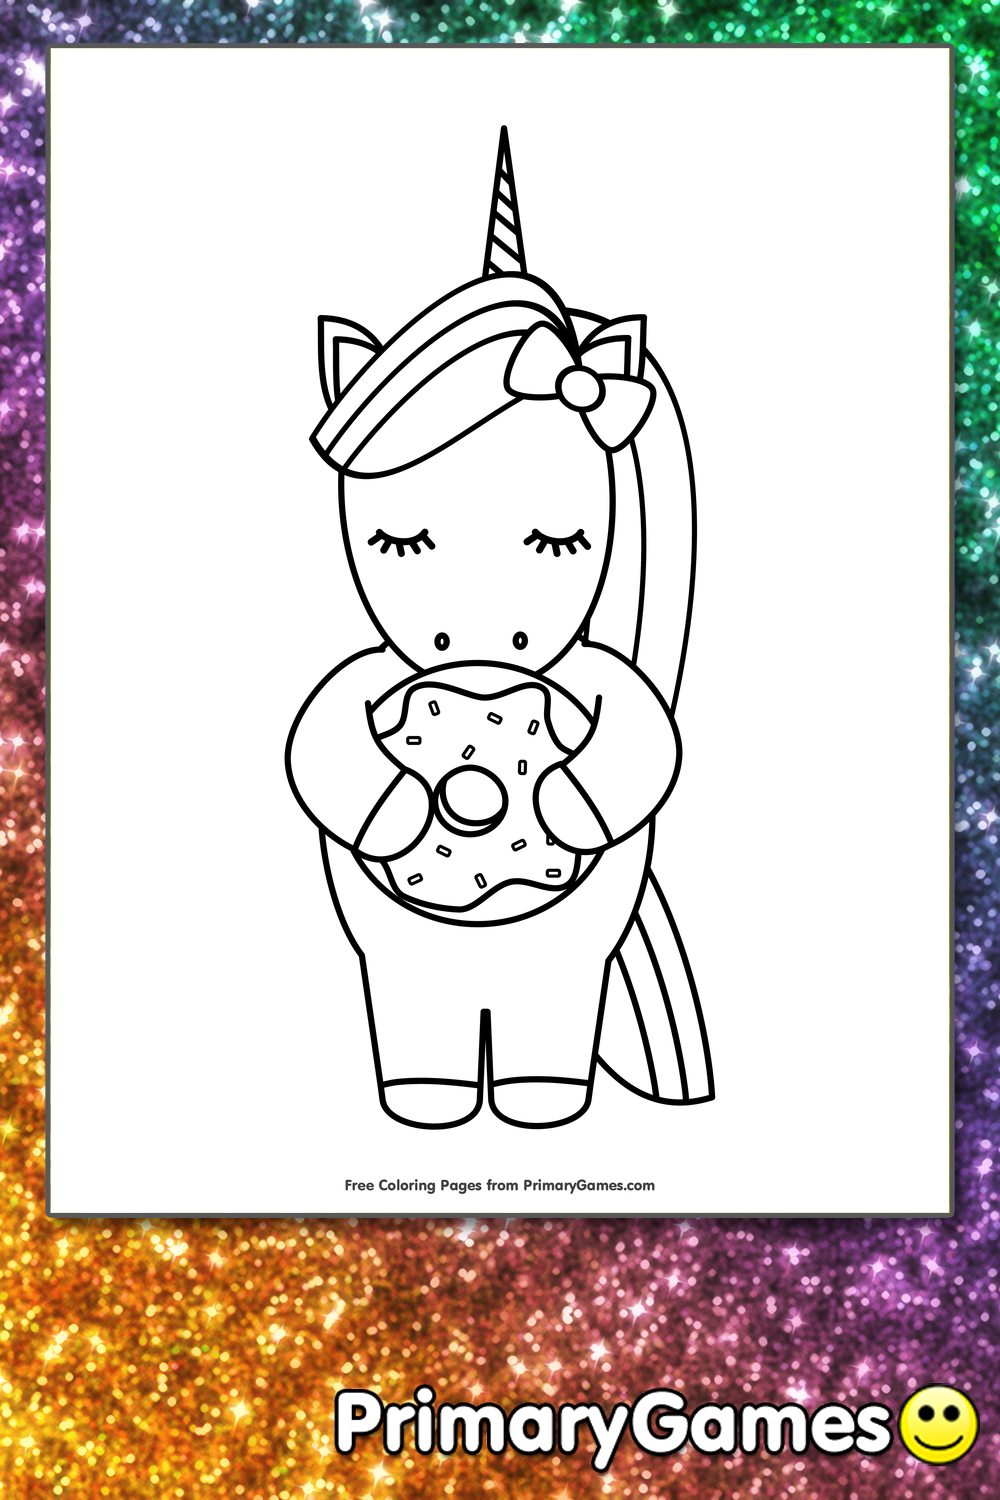 Unicorn Holding A Donut Coloring Page • FREE Printable PDF from ...